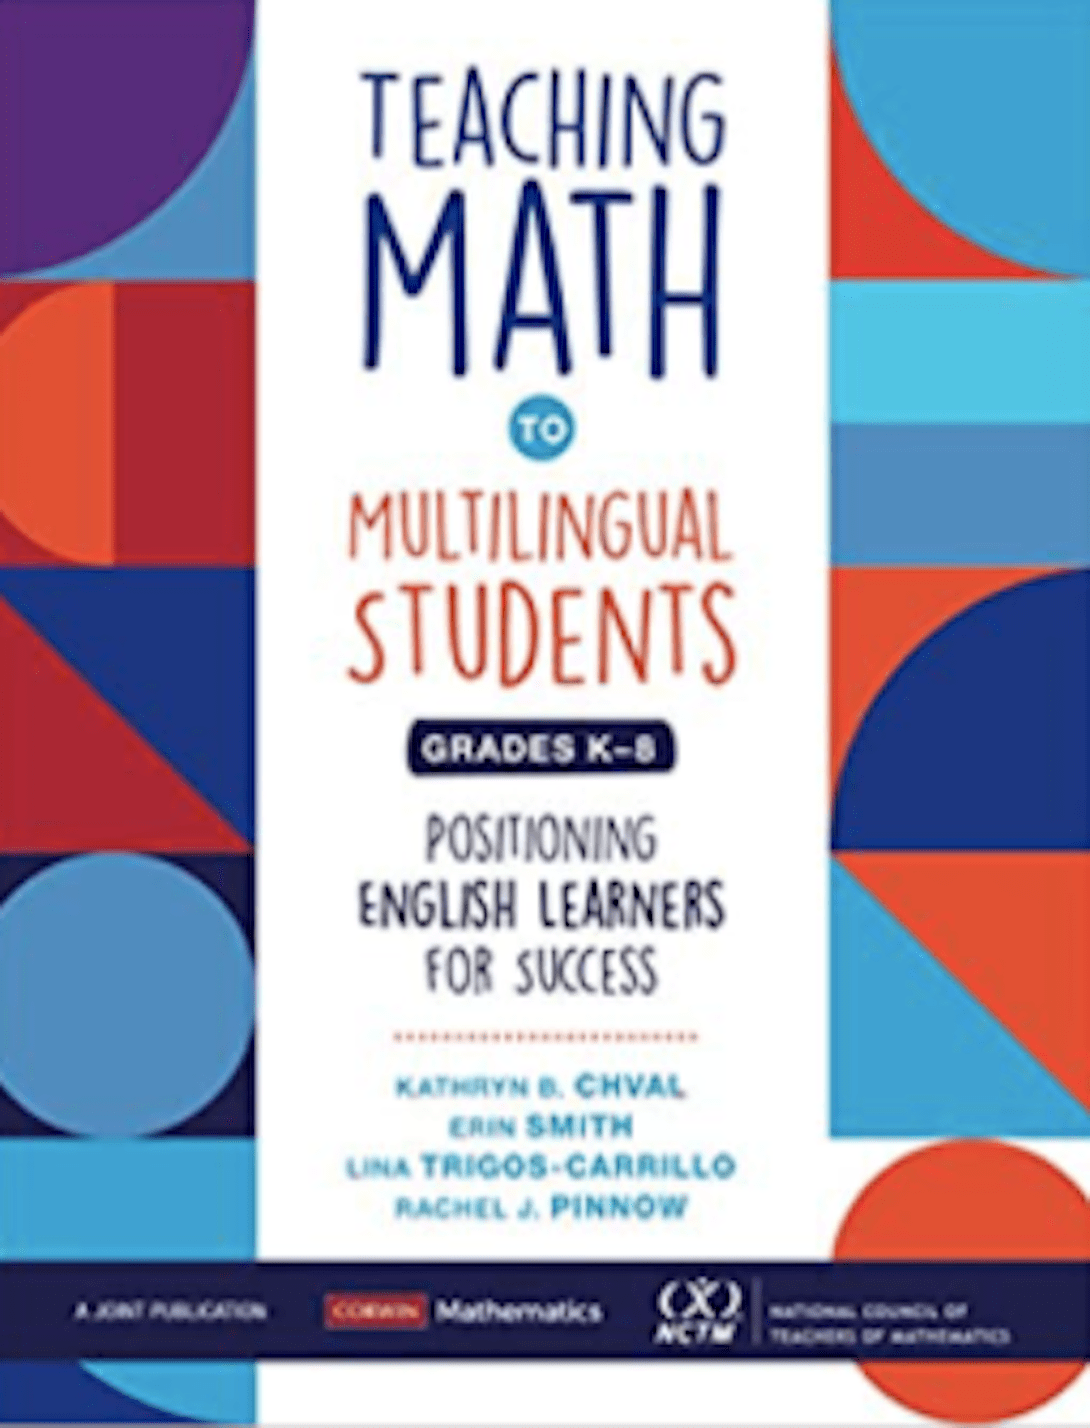 Teaching Math to Multilingual Students Grades K–8: Positioning English Learners for Success by Kathryn B. Chval, Erin Smith, Lina Trigos-Carrillo, and Rachel J. Pinnow